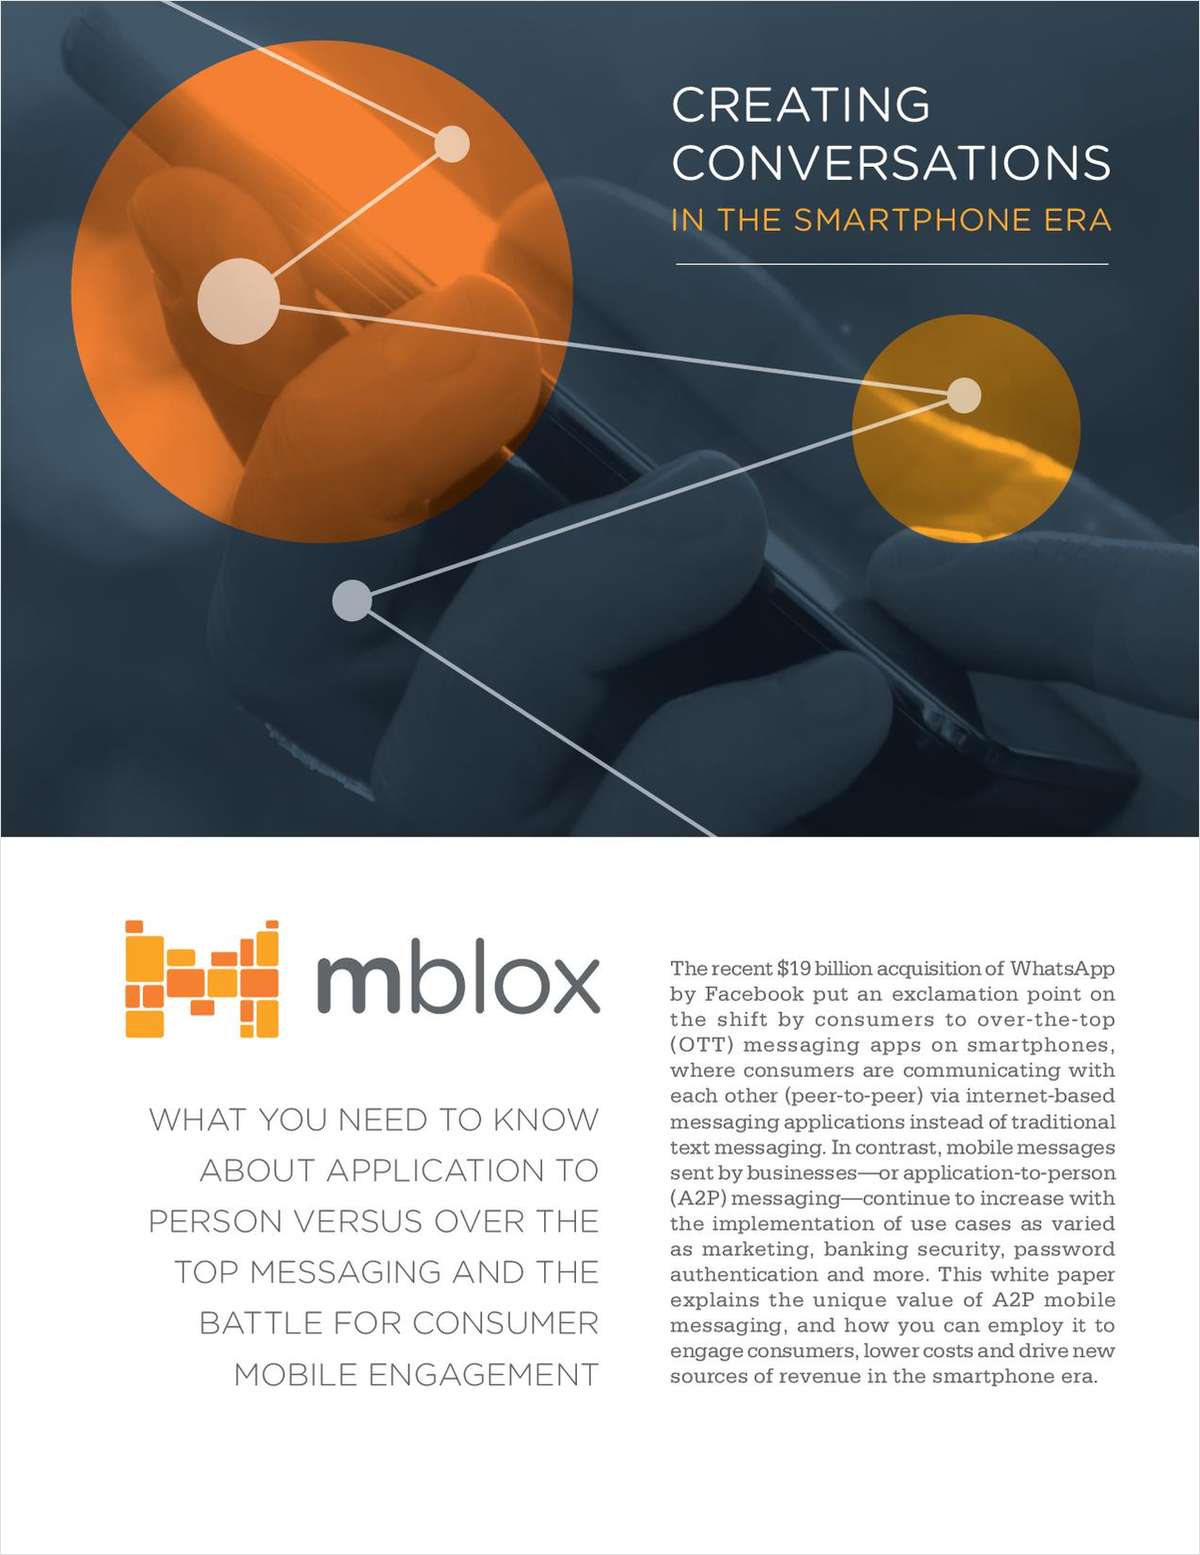 Free Guide: Creating Conversations in the Smartphone Era